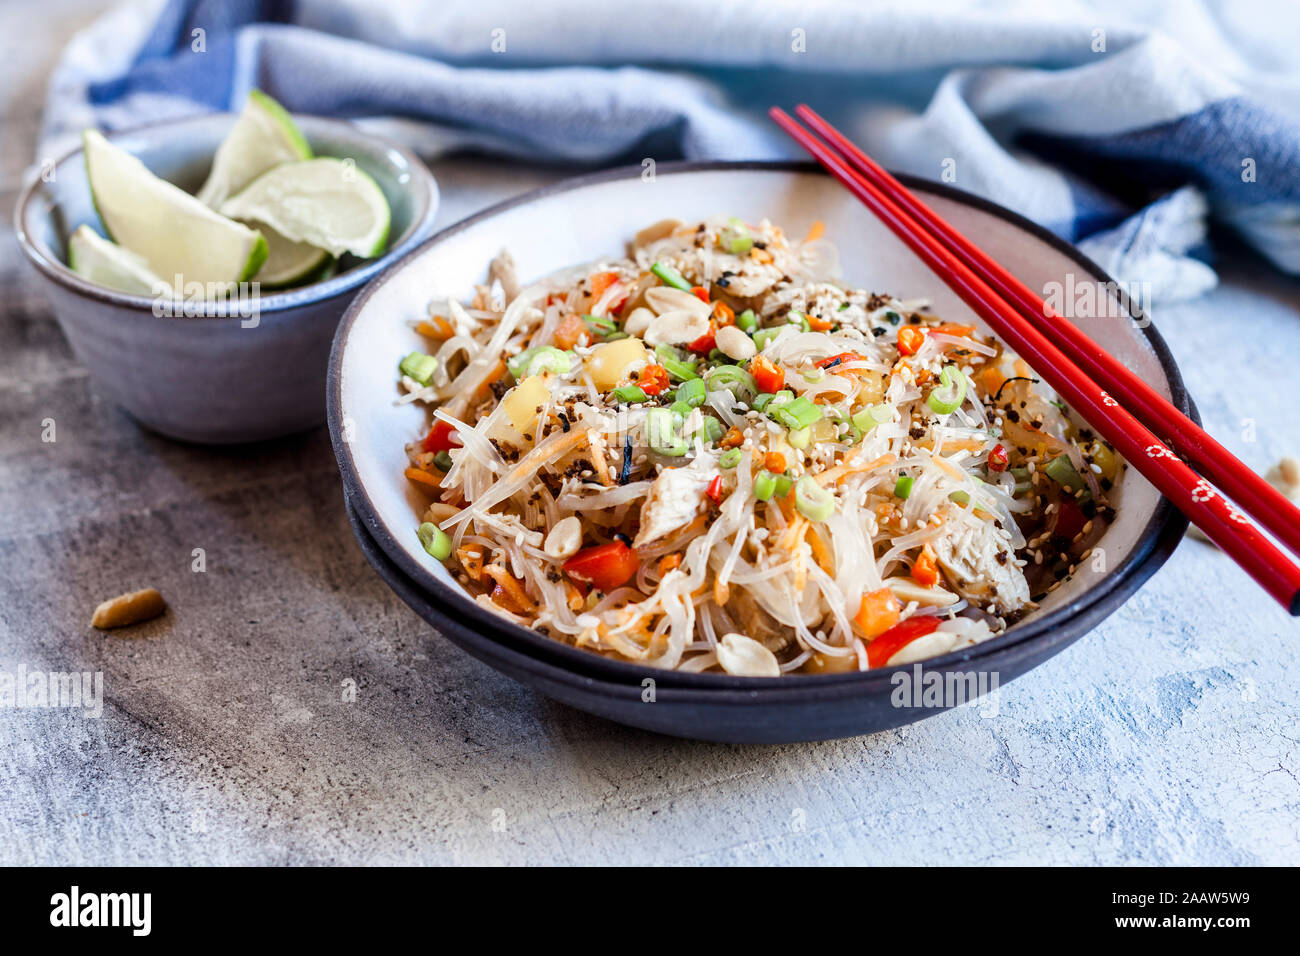 Glass noodle salad with Thai dressing, vegetables and chicken Stock Photo